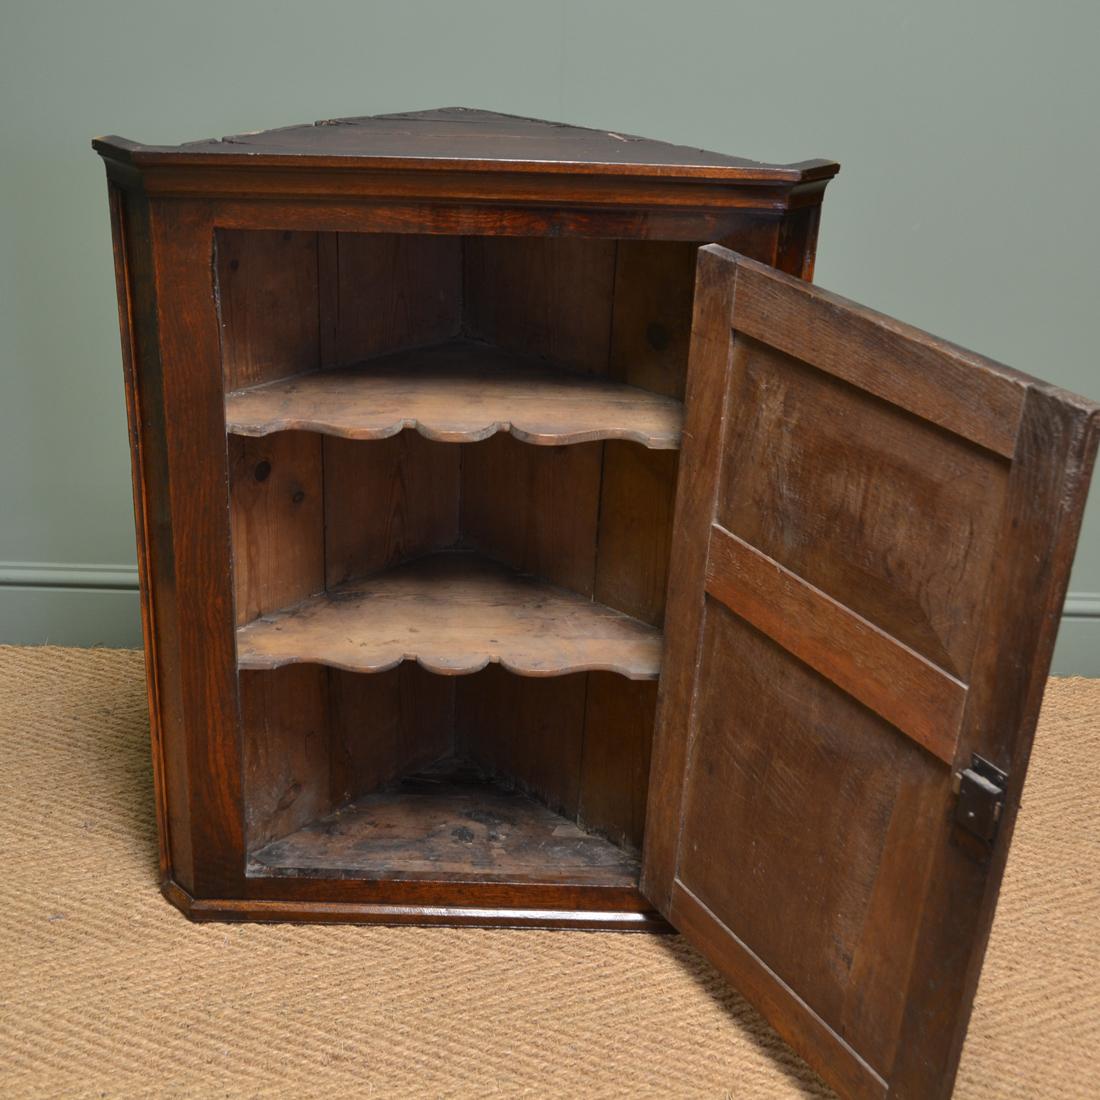 Small Georgian antique oak hanging corner cupboard

Of lovely small neat proportions, this charming corner cupboard dates from around 1790. With a moulded cornice above a beautifully figured panelled door with key with working lock, the interior